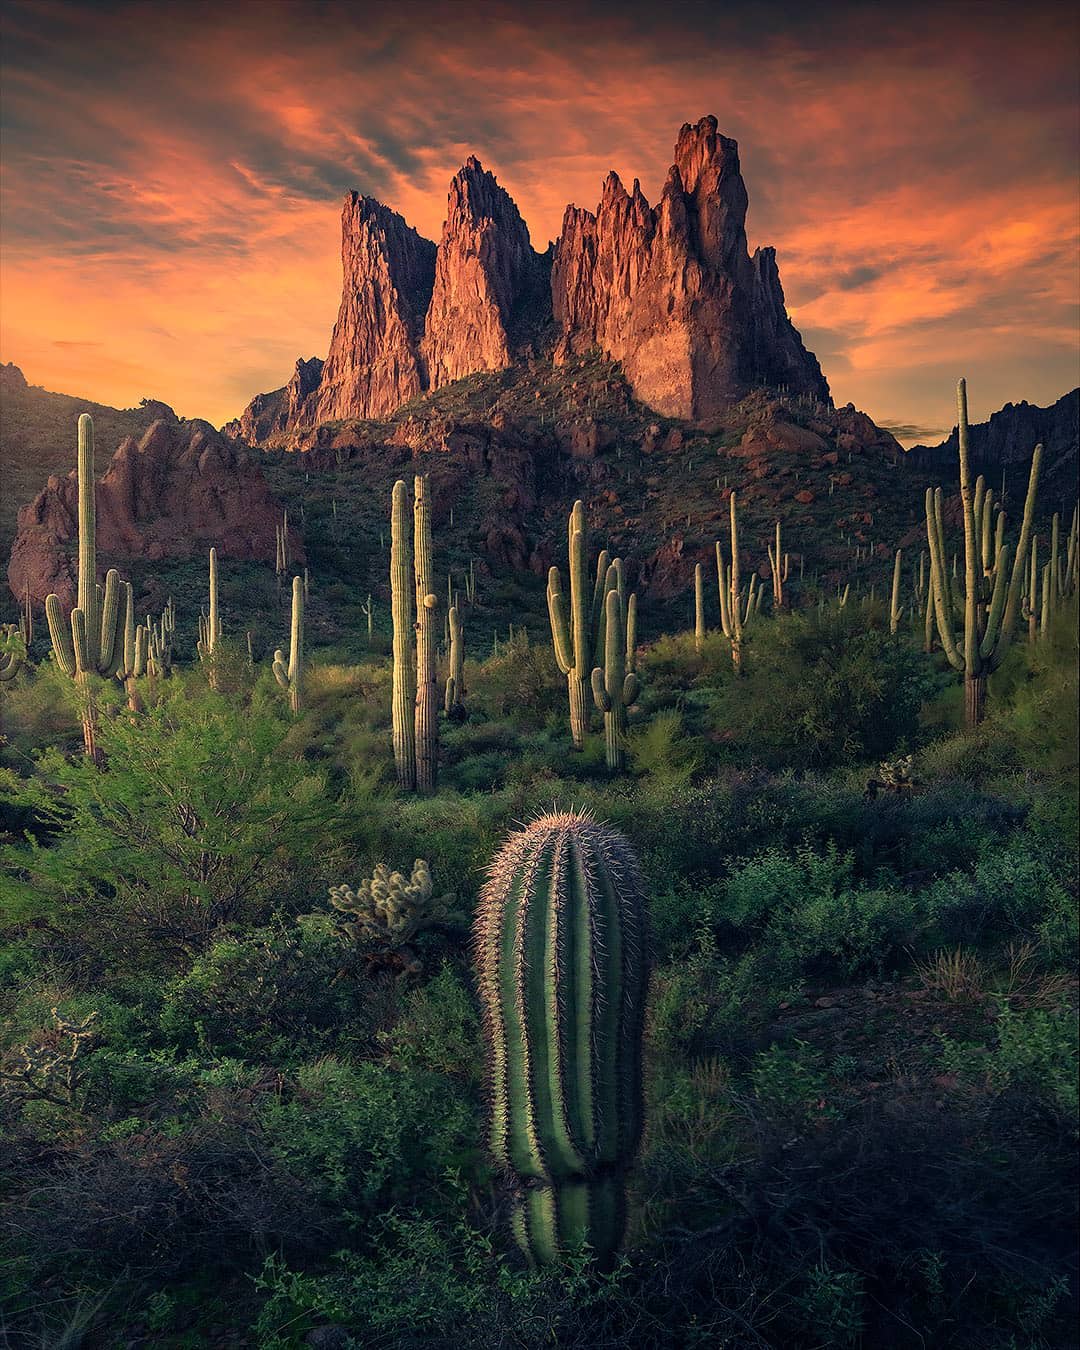 The Guardians of the Superstition Mountains, Arizona